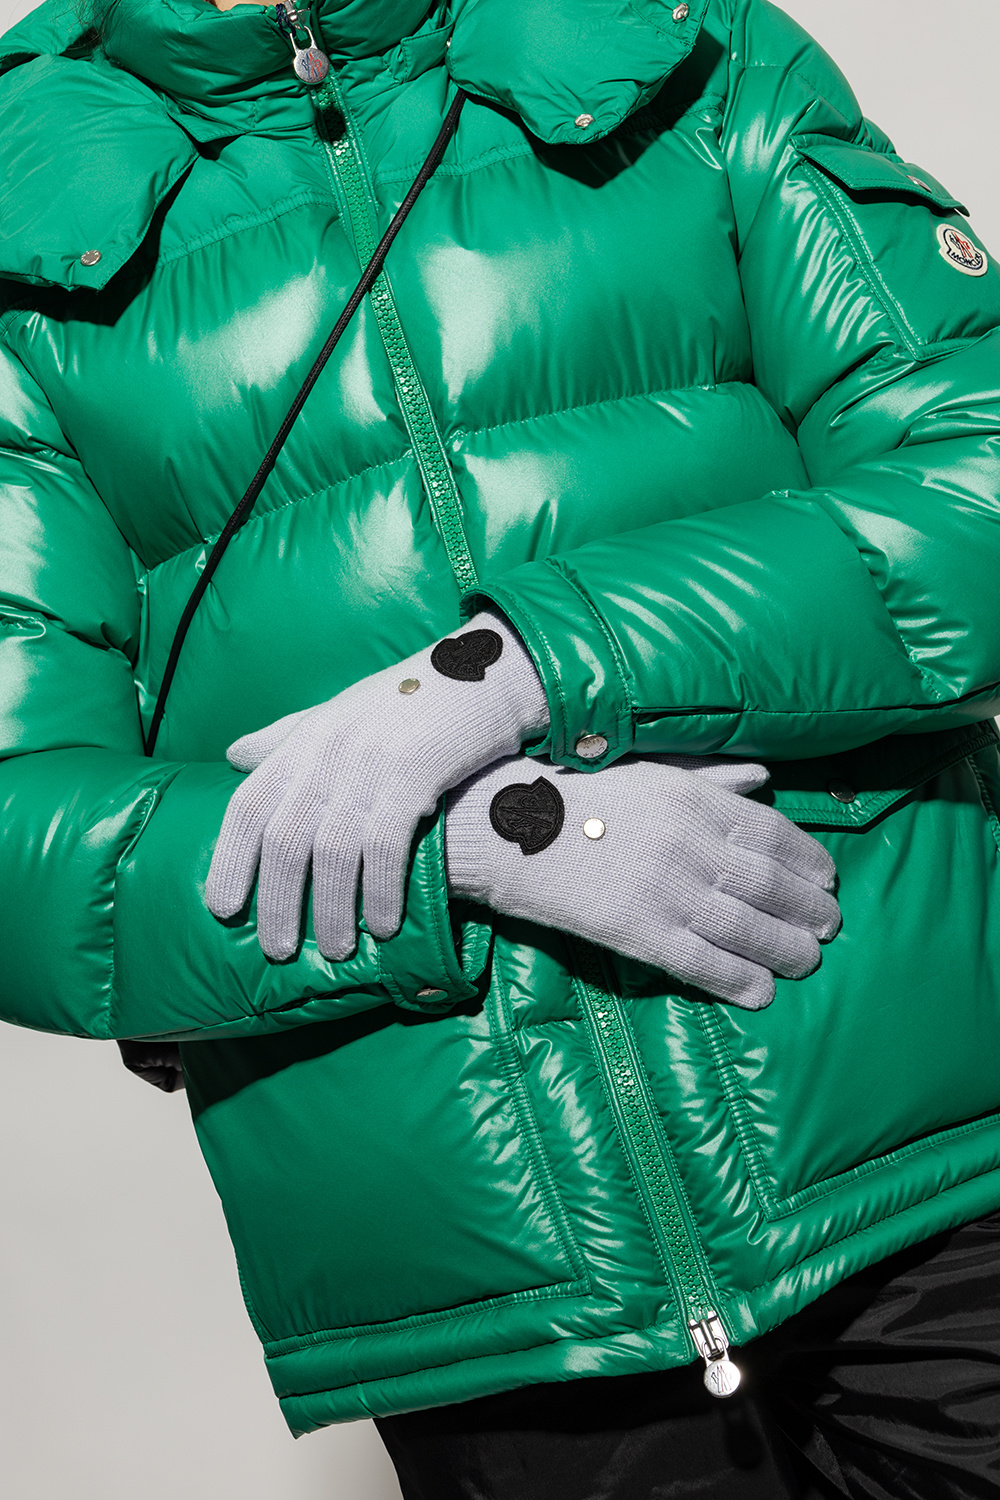 Moncler Genius 6 Only the necessary